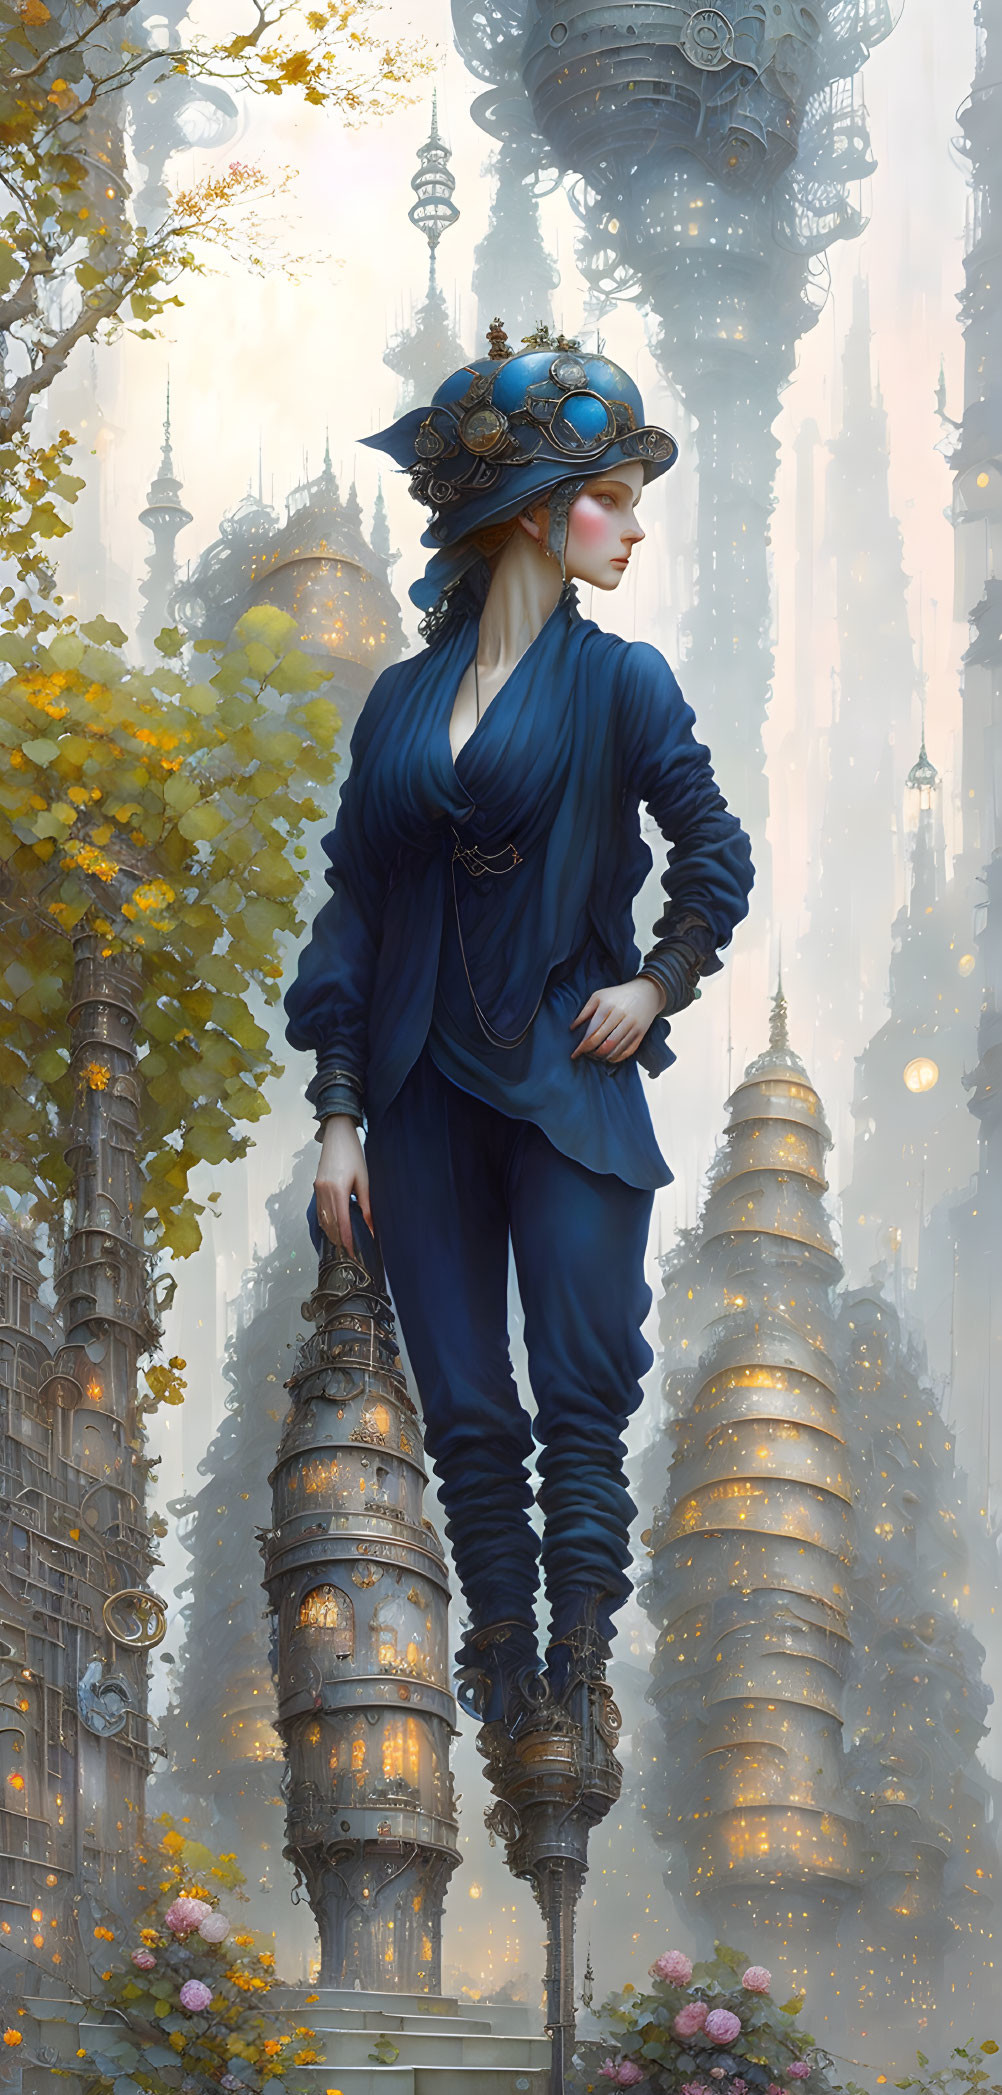 Woman in Blue Outfit and Ornate Hat on Spire with Misty Background